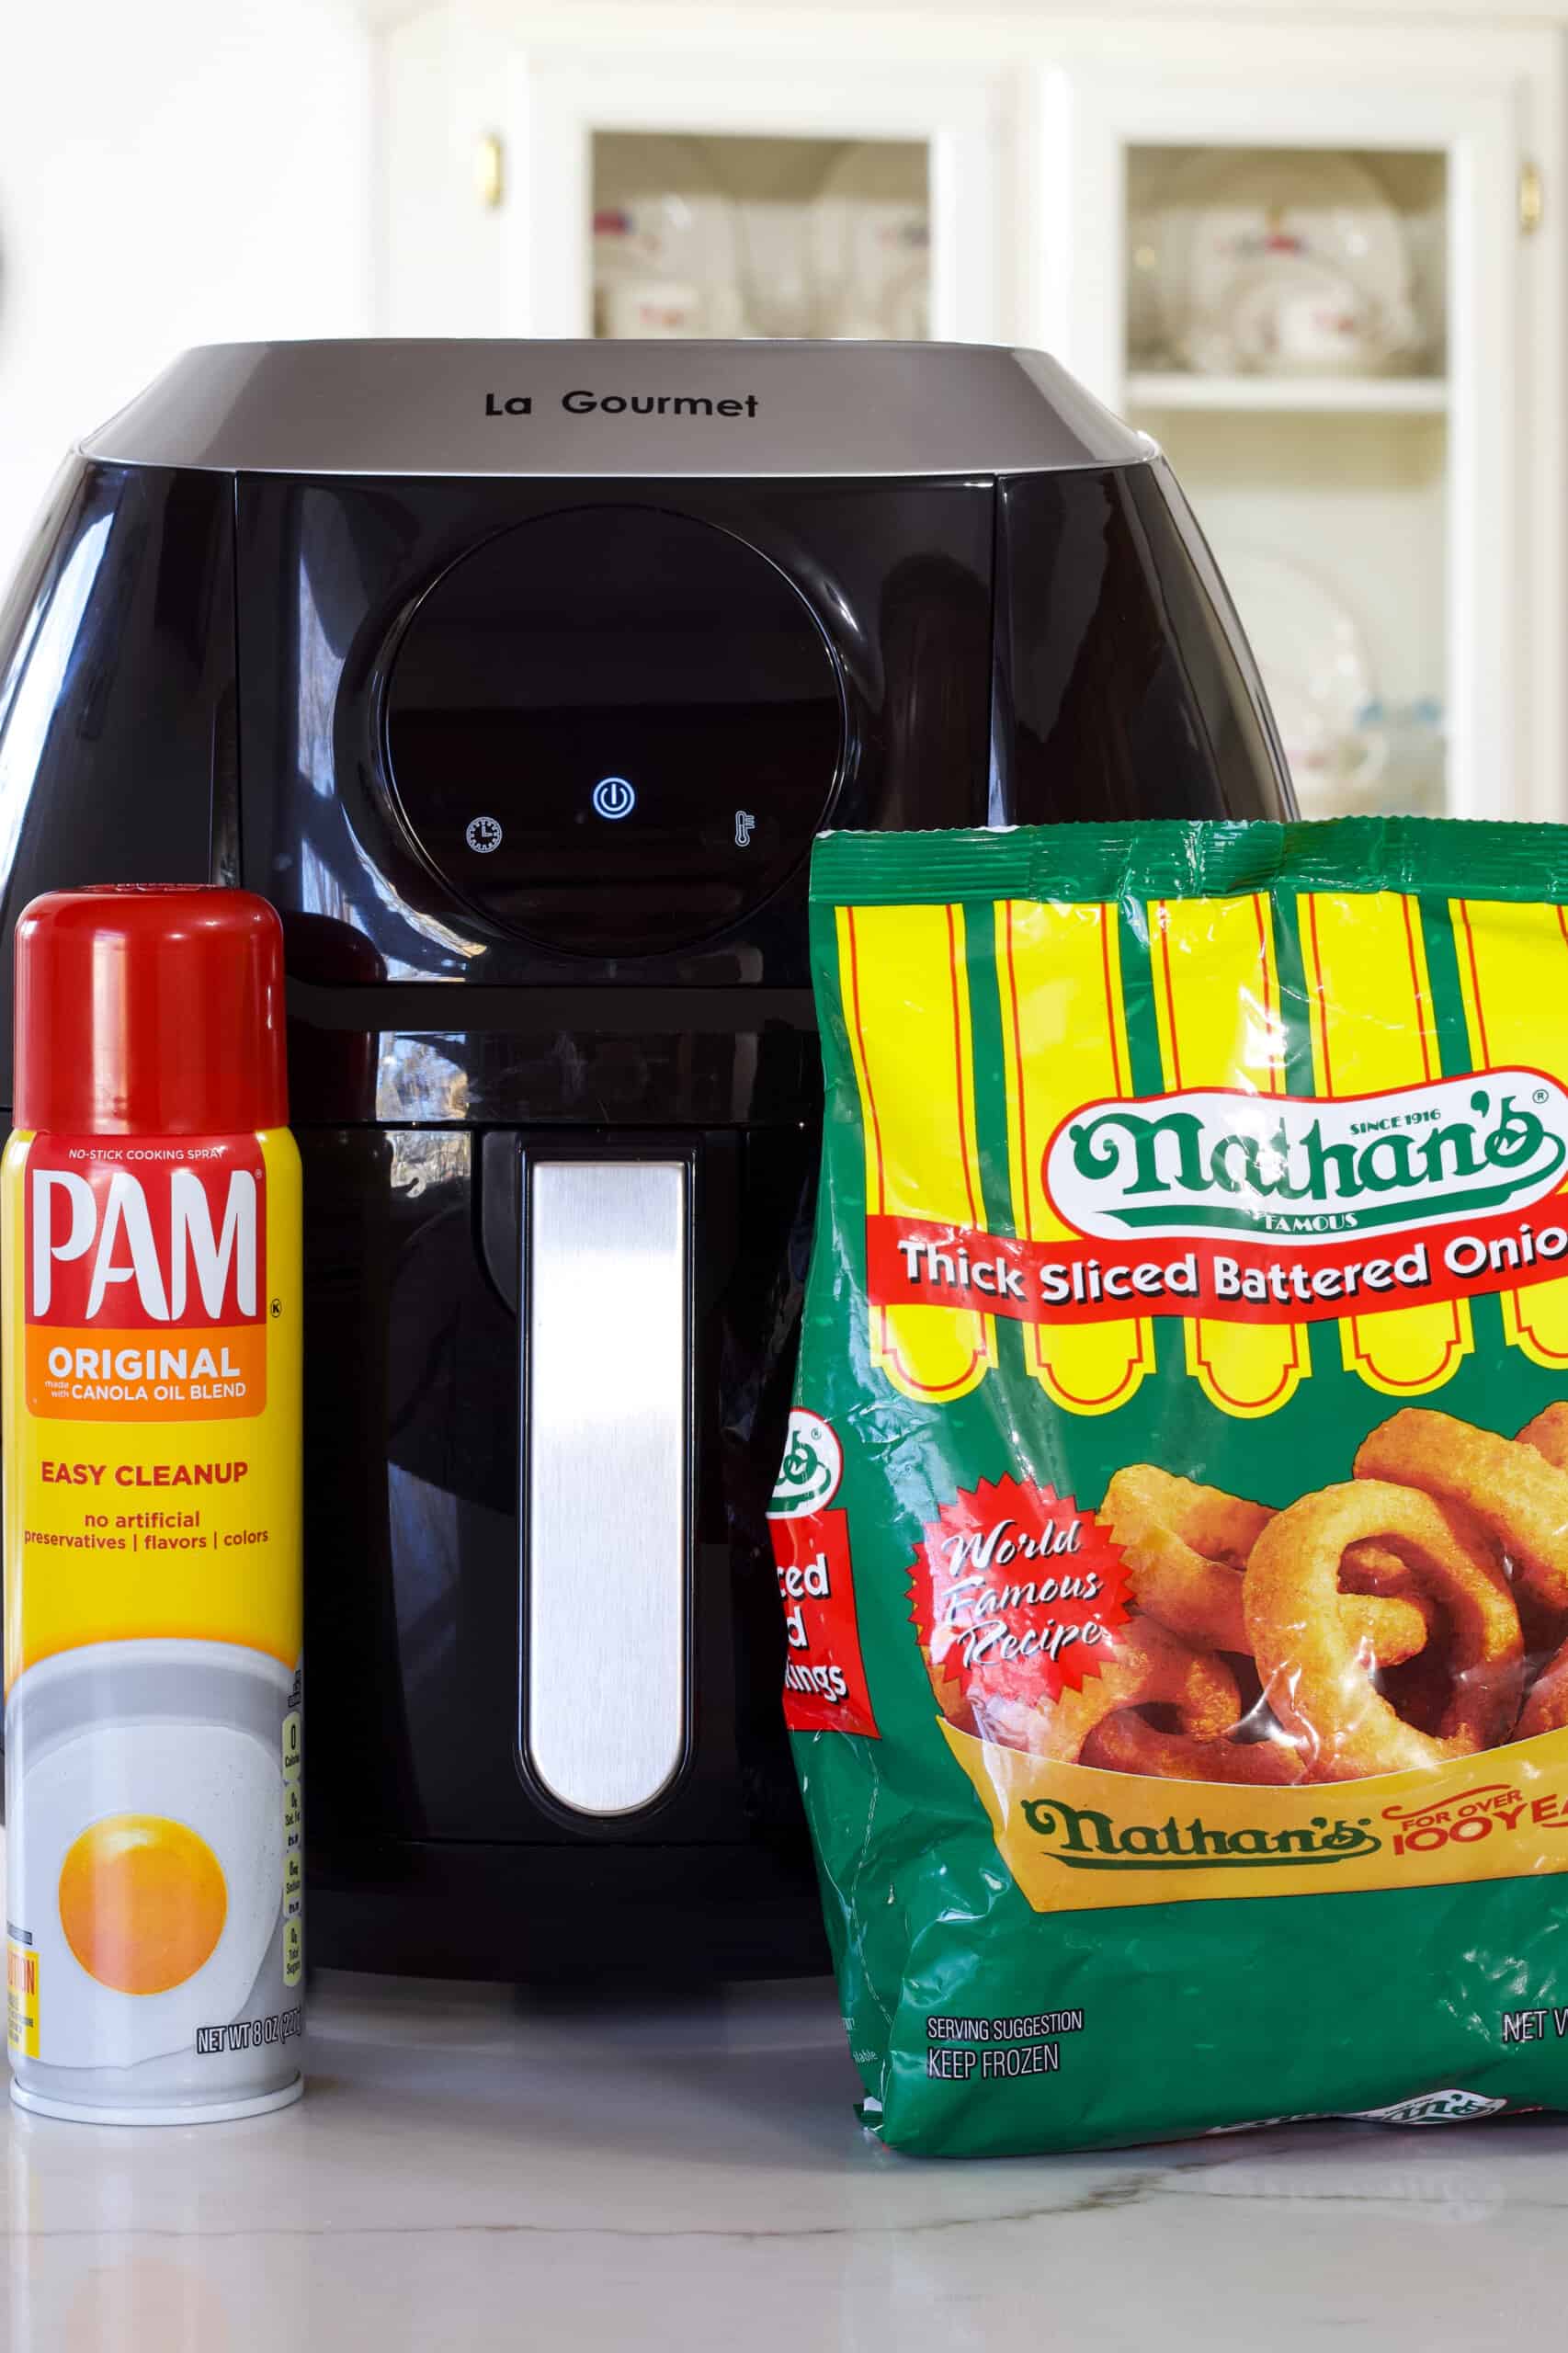 A can of Pam no-stick spray and a bag of Nathan's onion rings sitting on the counter in front of the air fryer.